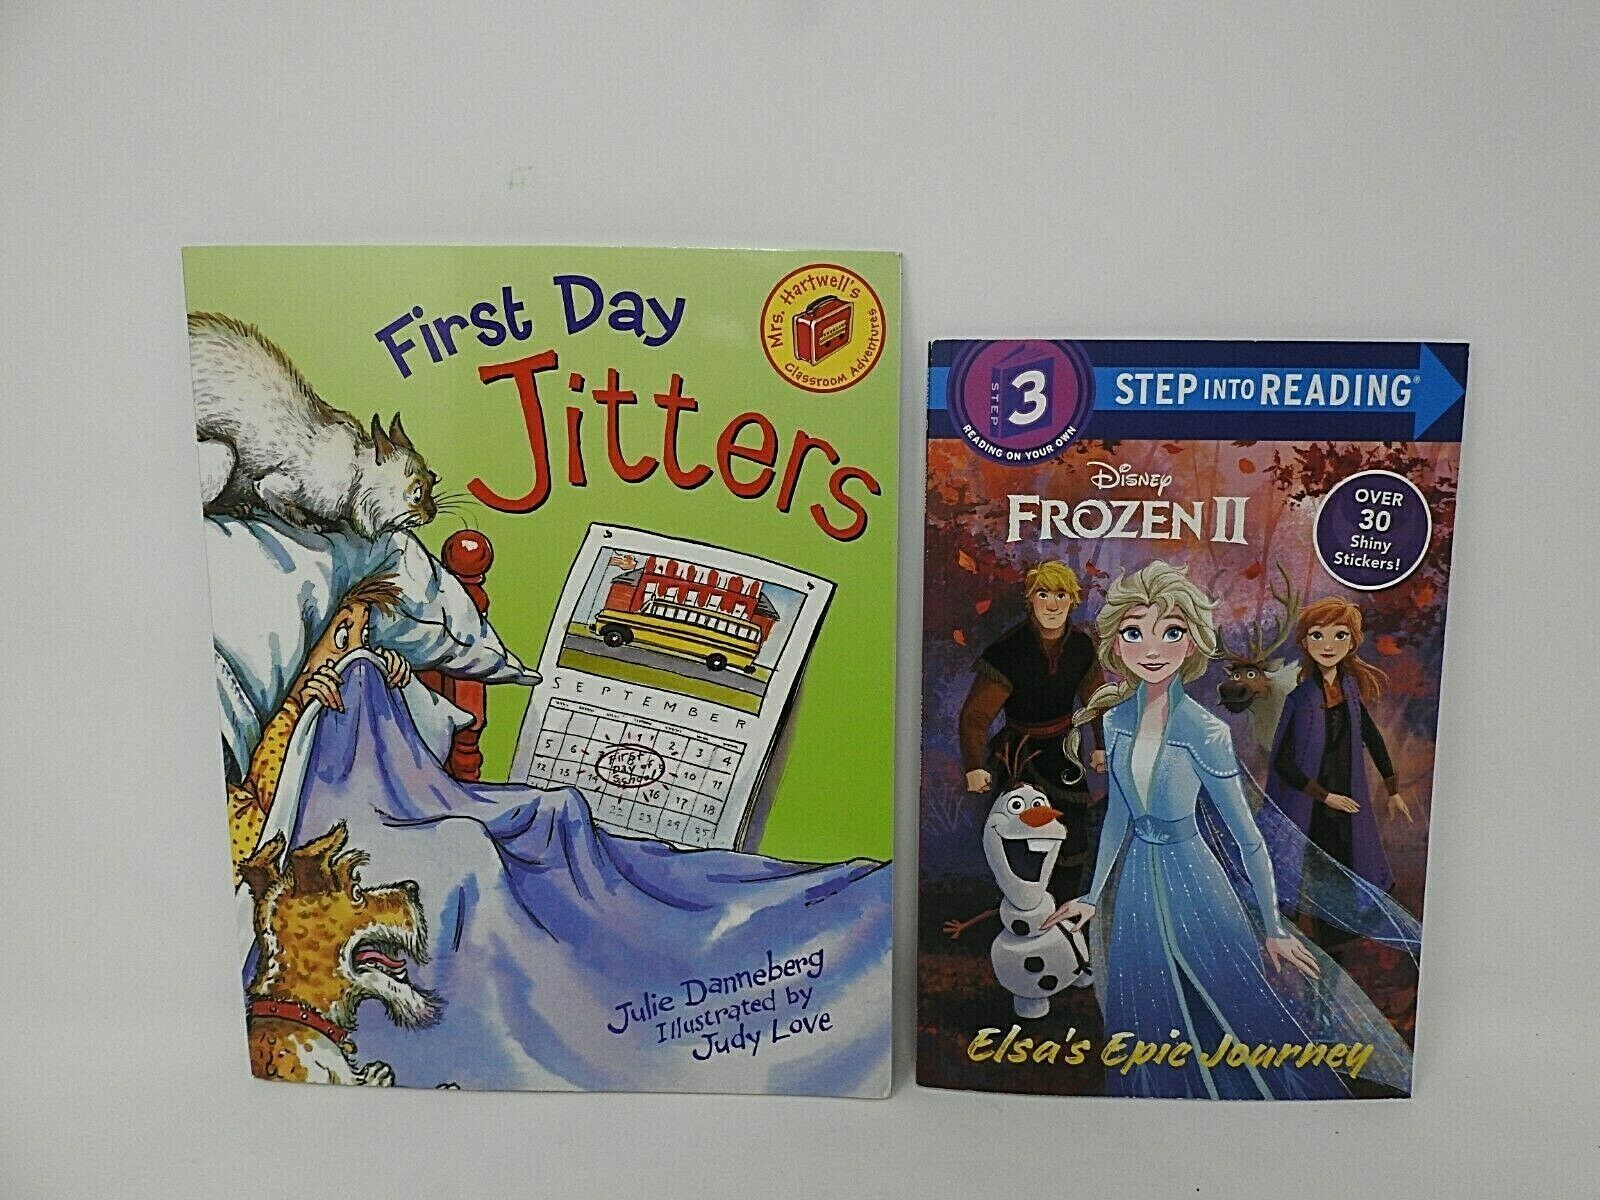 2 Books: Step 3 Disney Frozen II Elsa's Epic Journey and First Day Jitters (New)